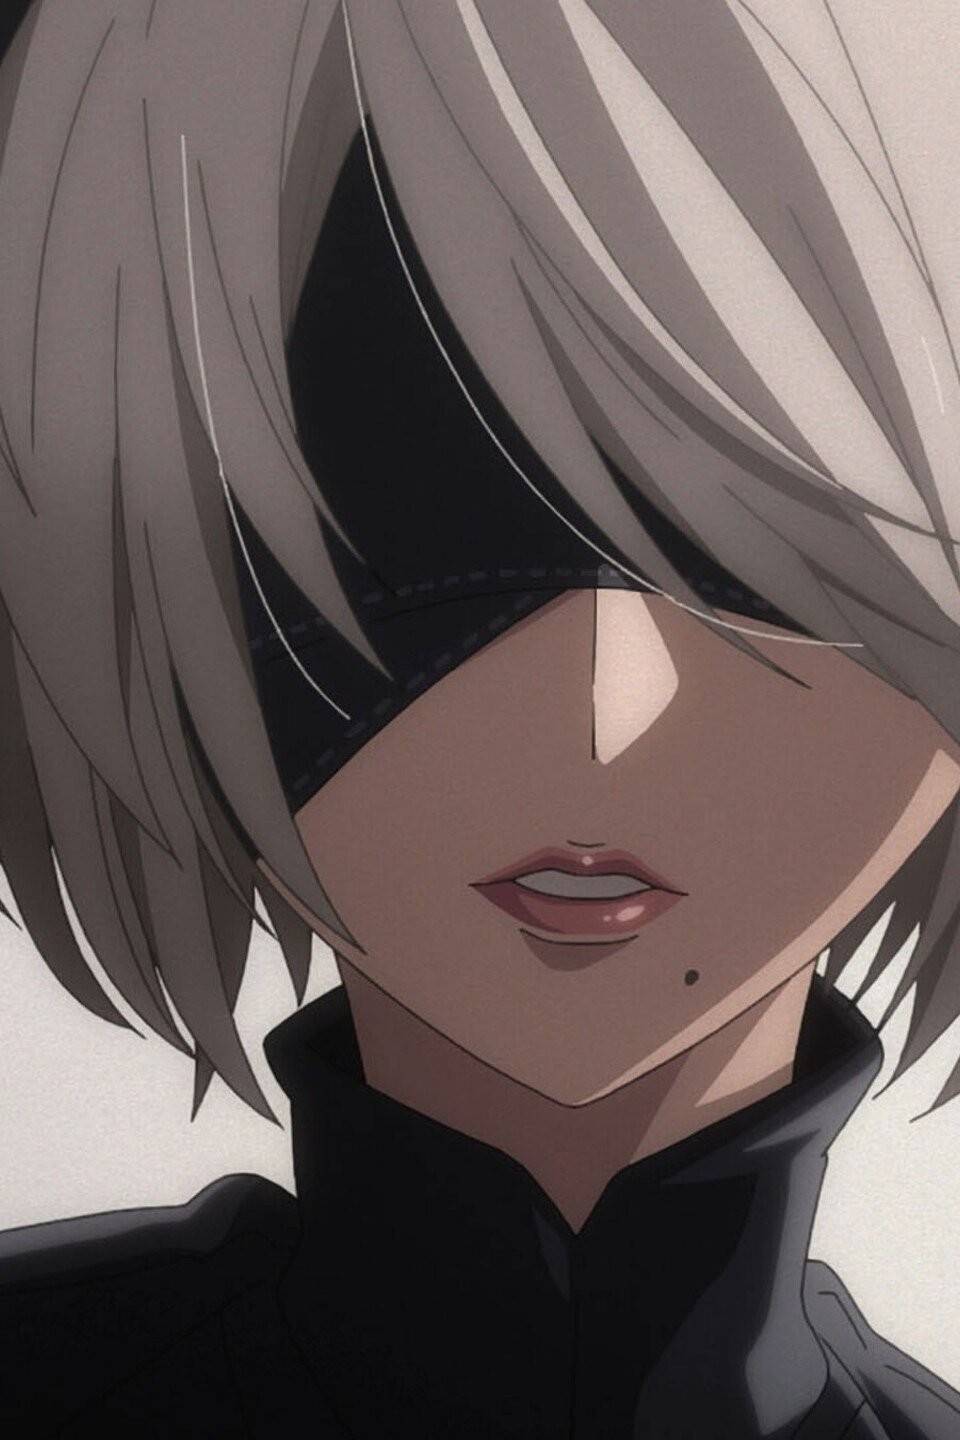 Anime Trending - NieR:Automata Ver1.1a - Anime Trailer! The anime is  scheduled for January 7.